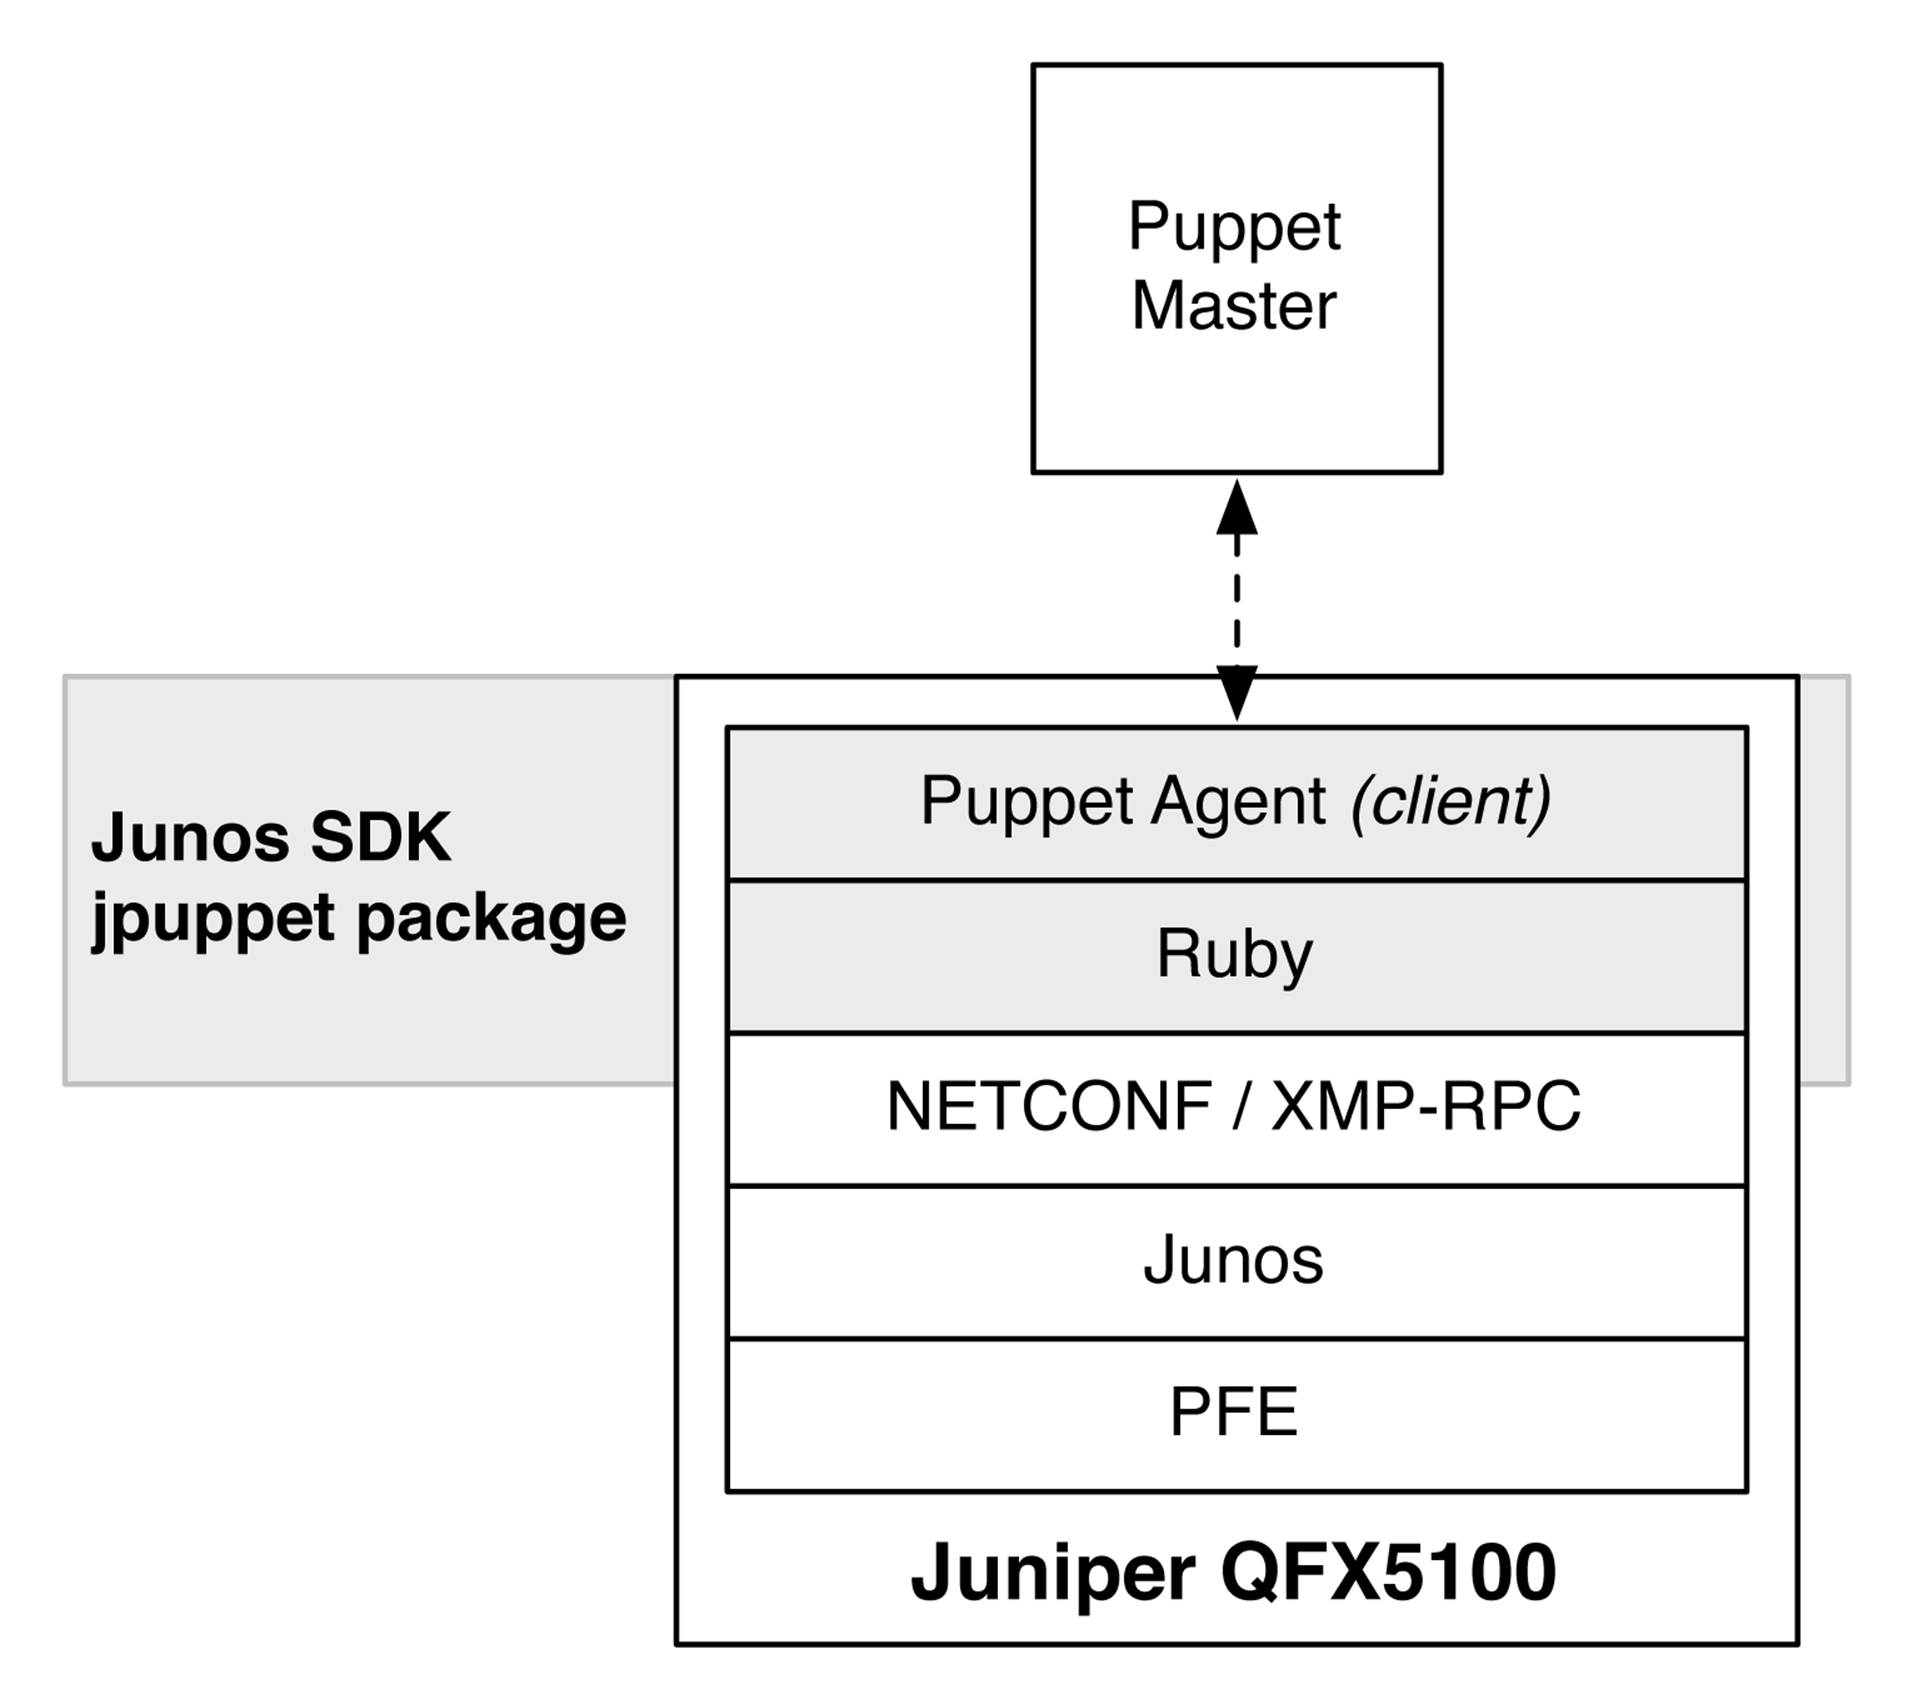 The Juniper QFX5100 architecture with the Junos SDK and JPuppet package